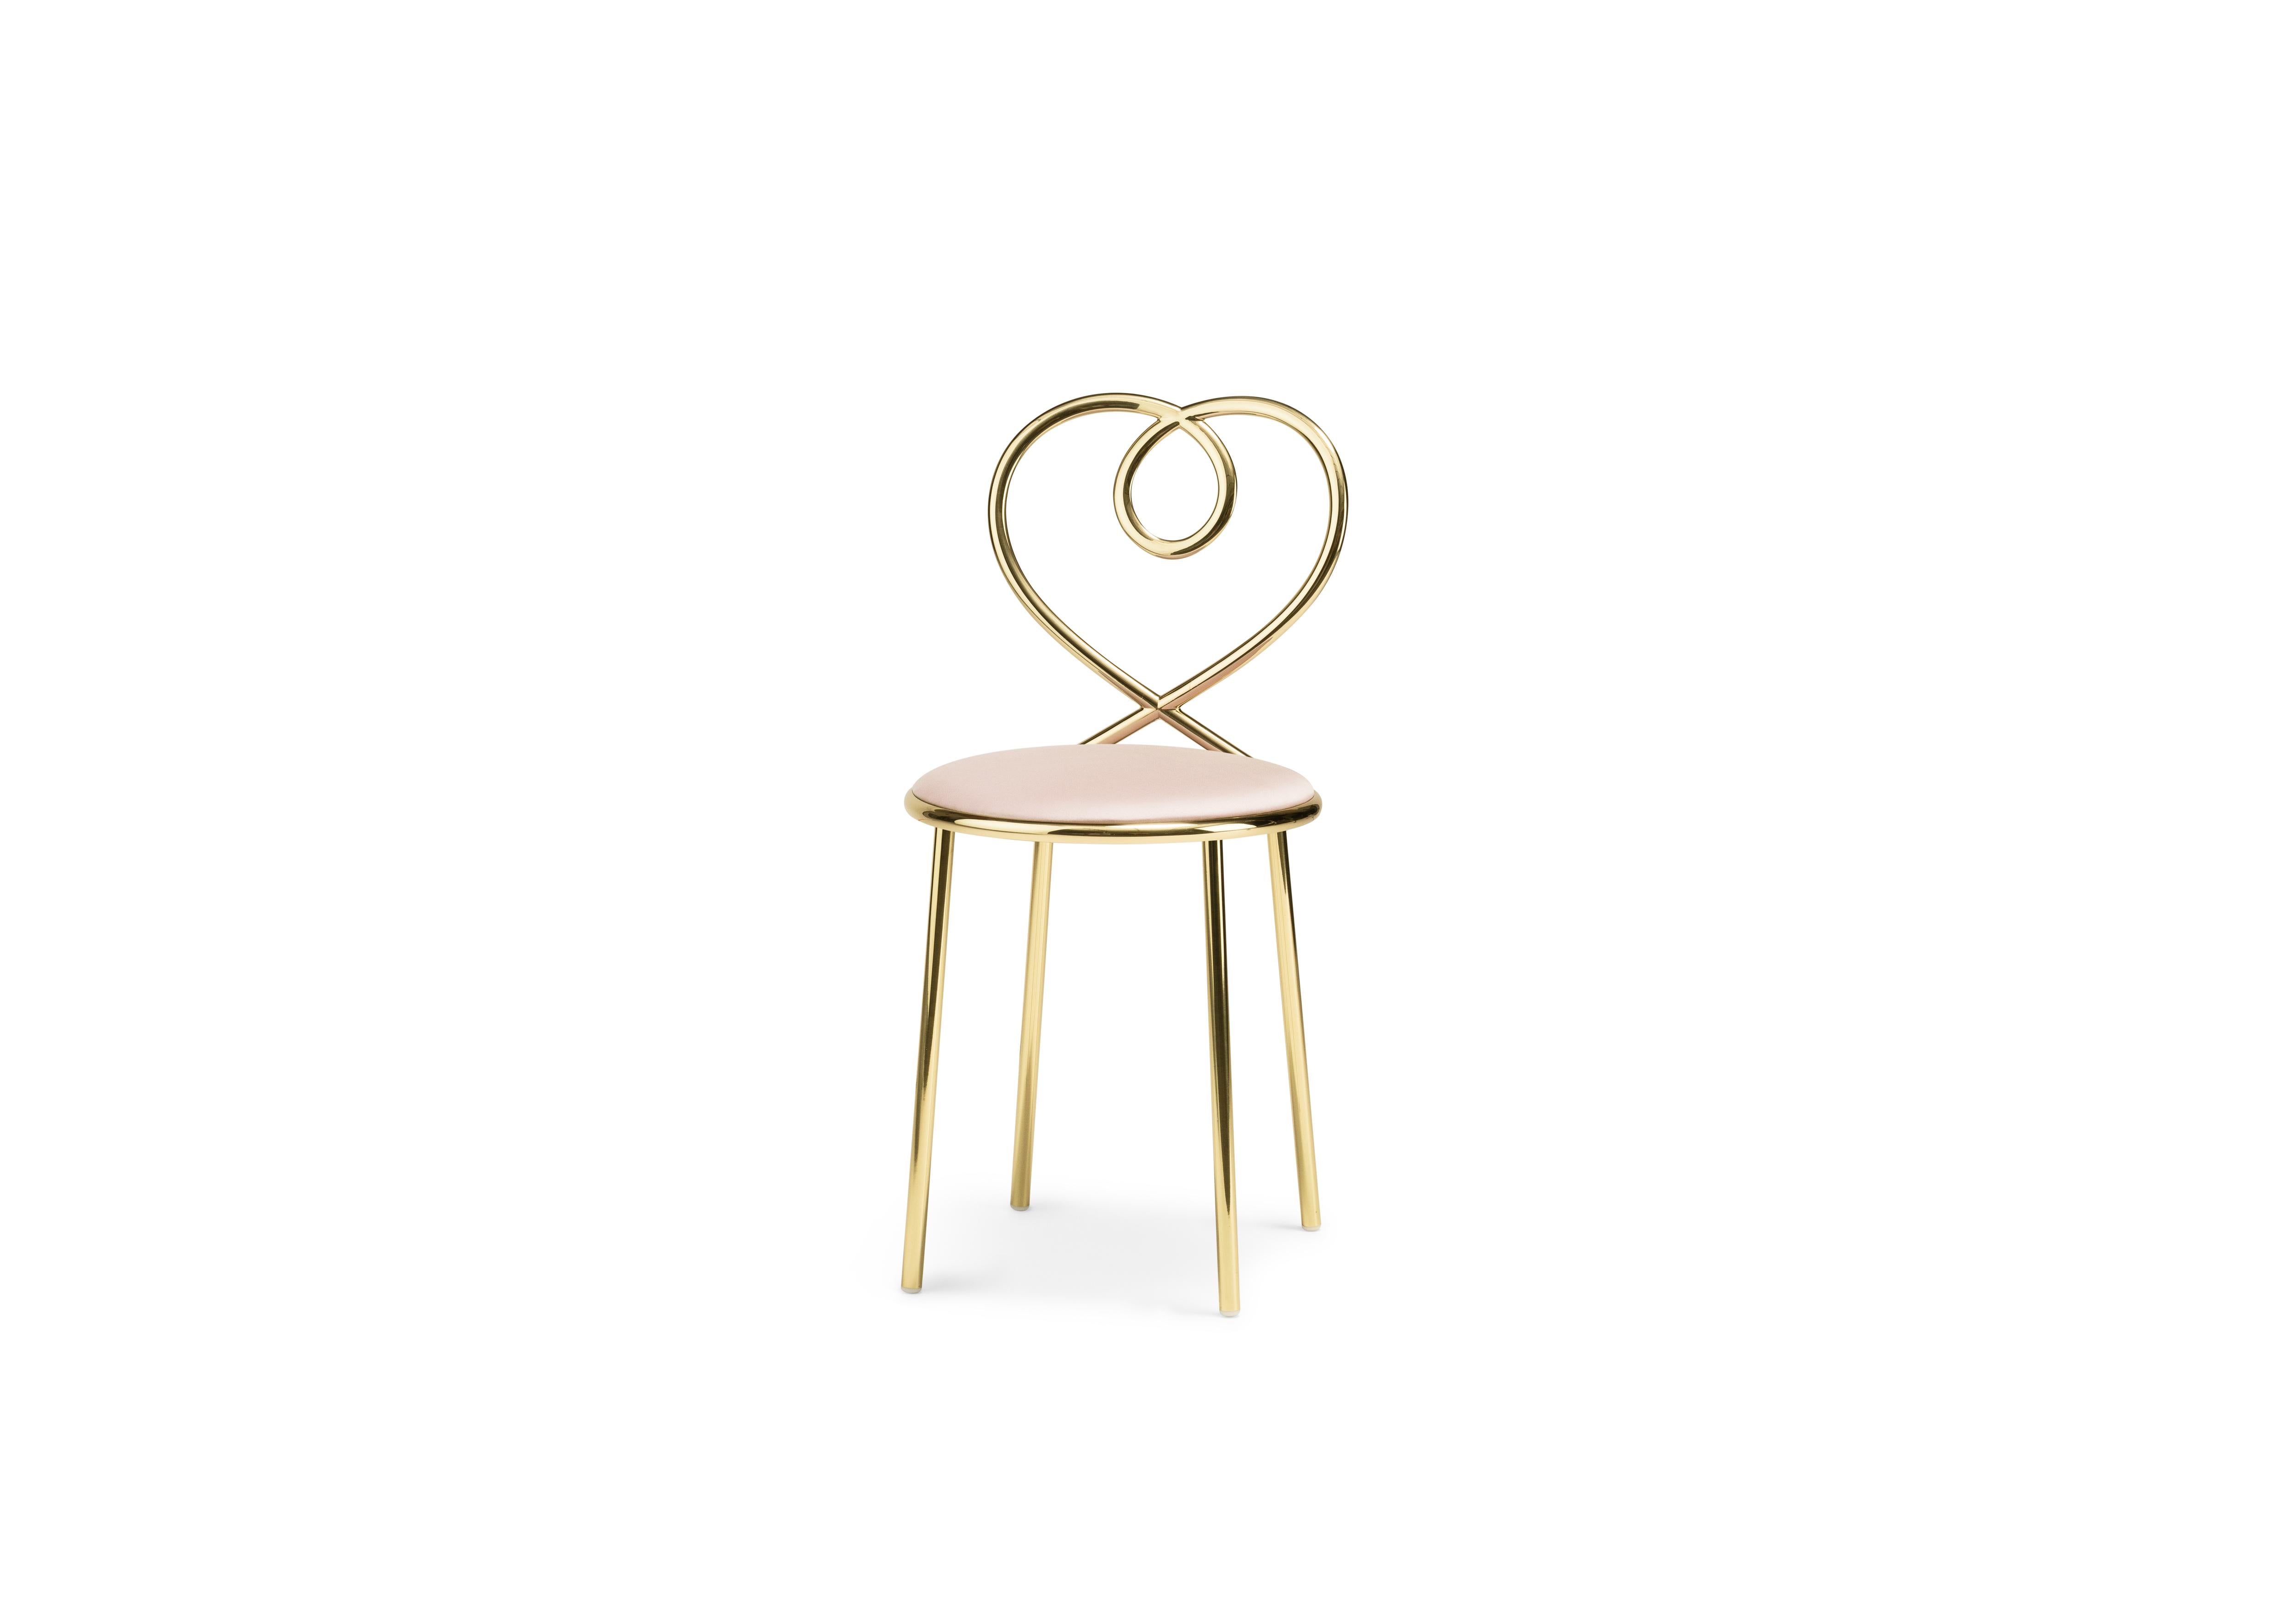 Love is all around. Clench yours tight, hold it close, and bestow on it the shiny perch it so wishes it deserved. Love chair for Ghidini 1961 provides a sumptuously soft landing for the love you’ve decided to start domesticating. Seated on a pale